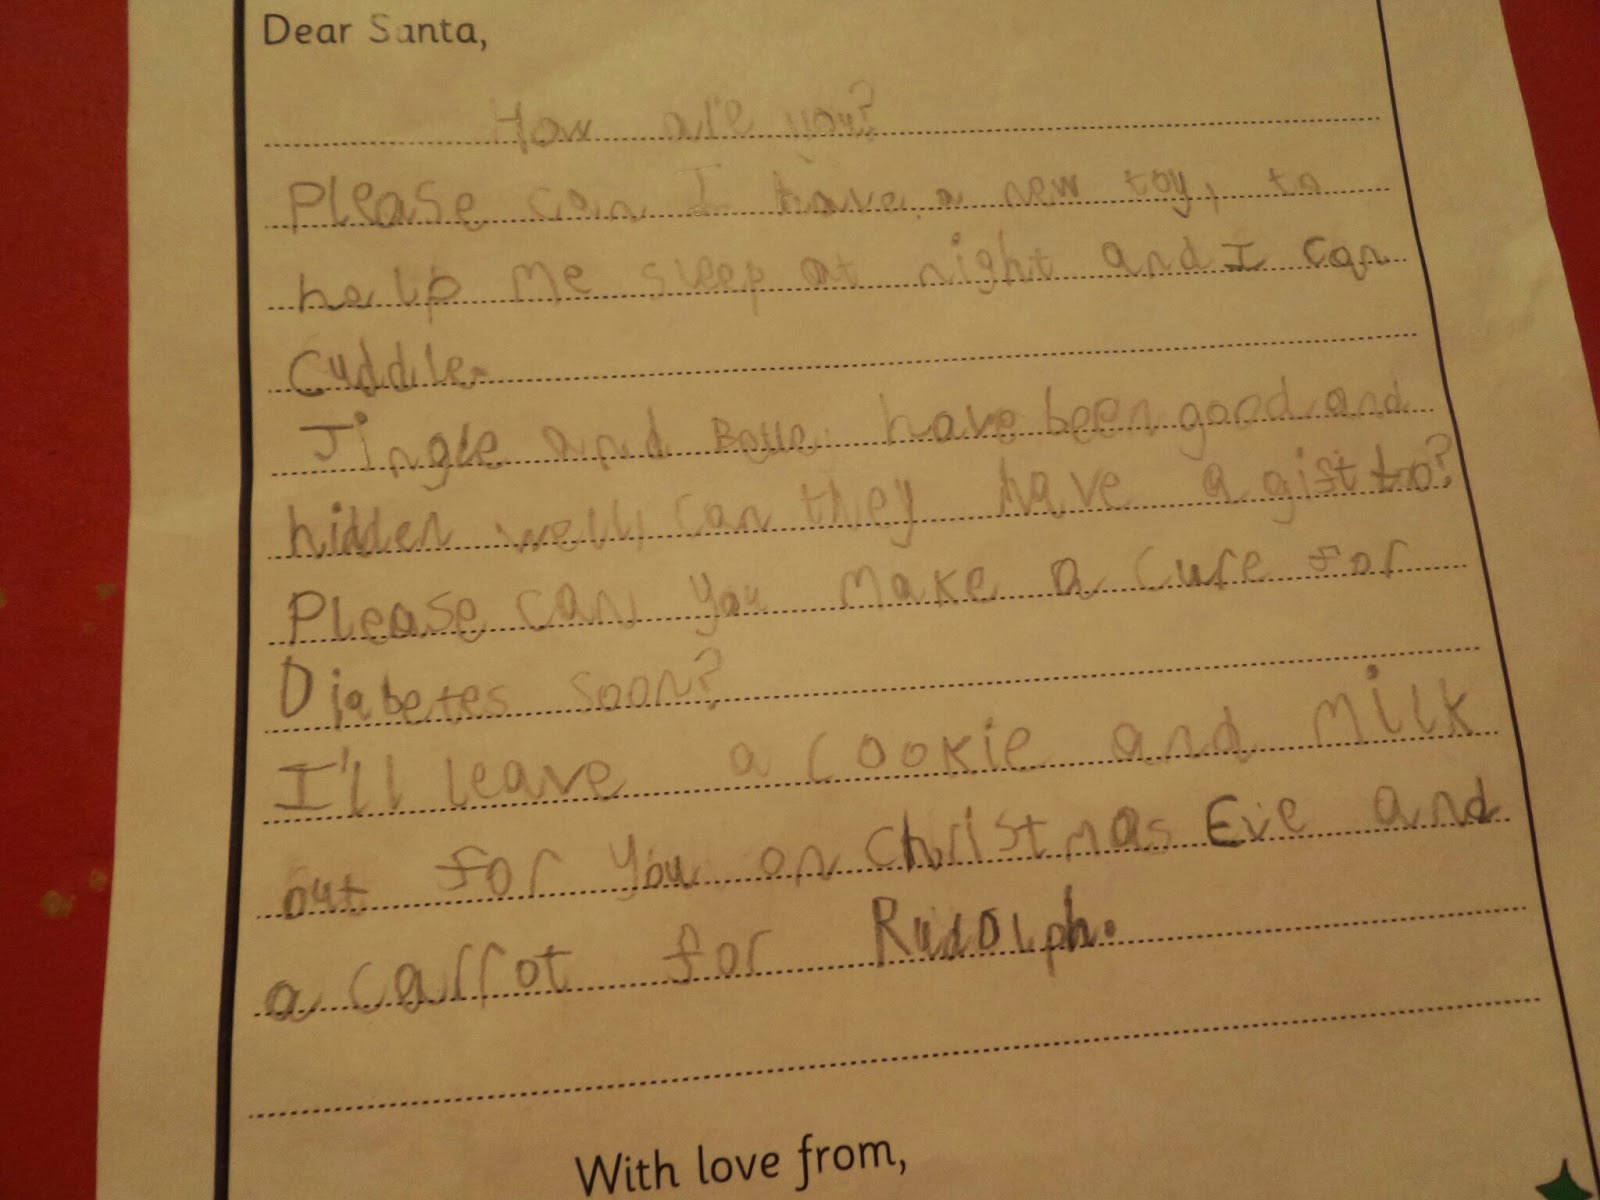 BB's letter to Santa asking him to cure diabetes soon